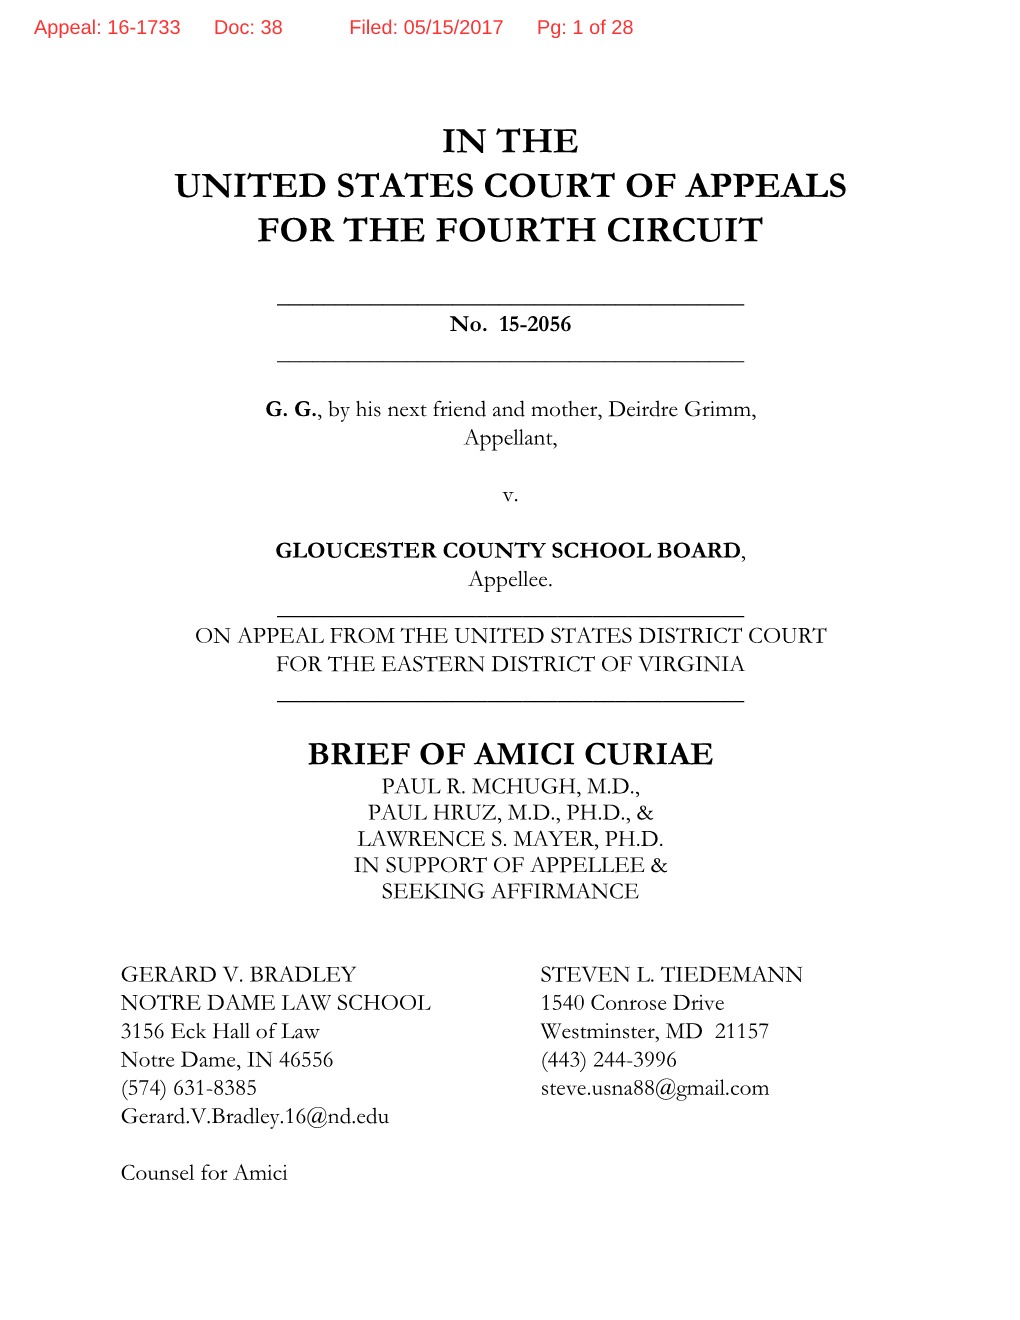 In the United States Court of Appeals for the Fourth Circuit